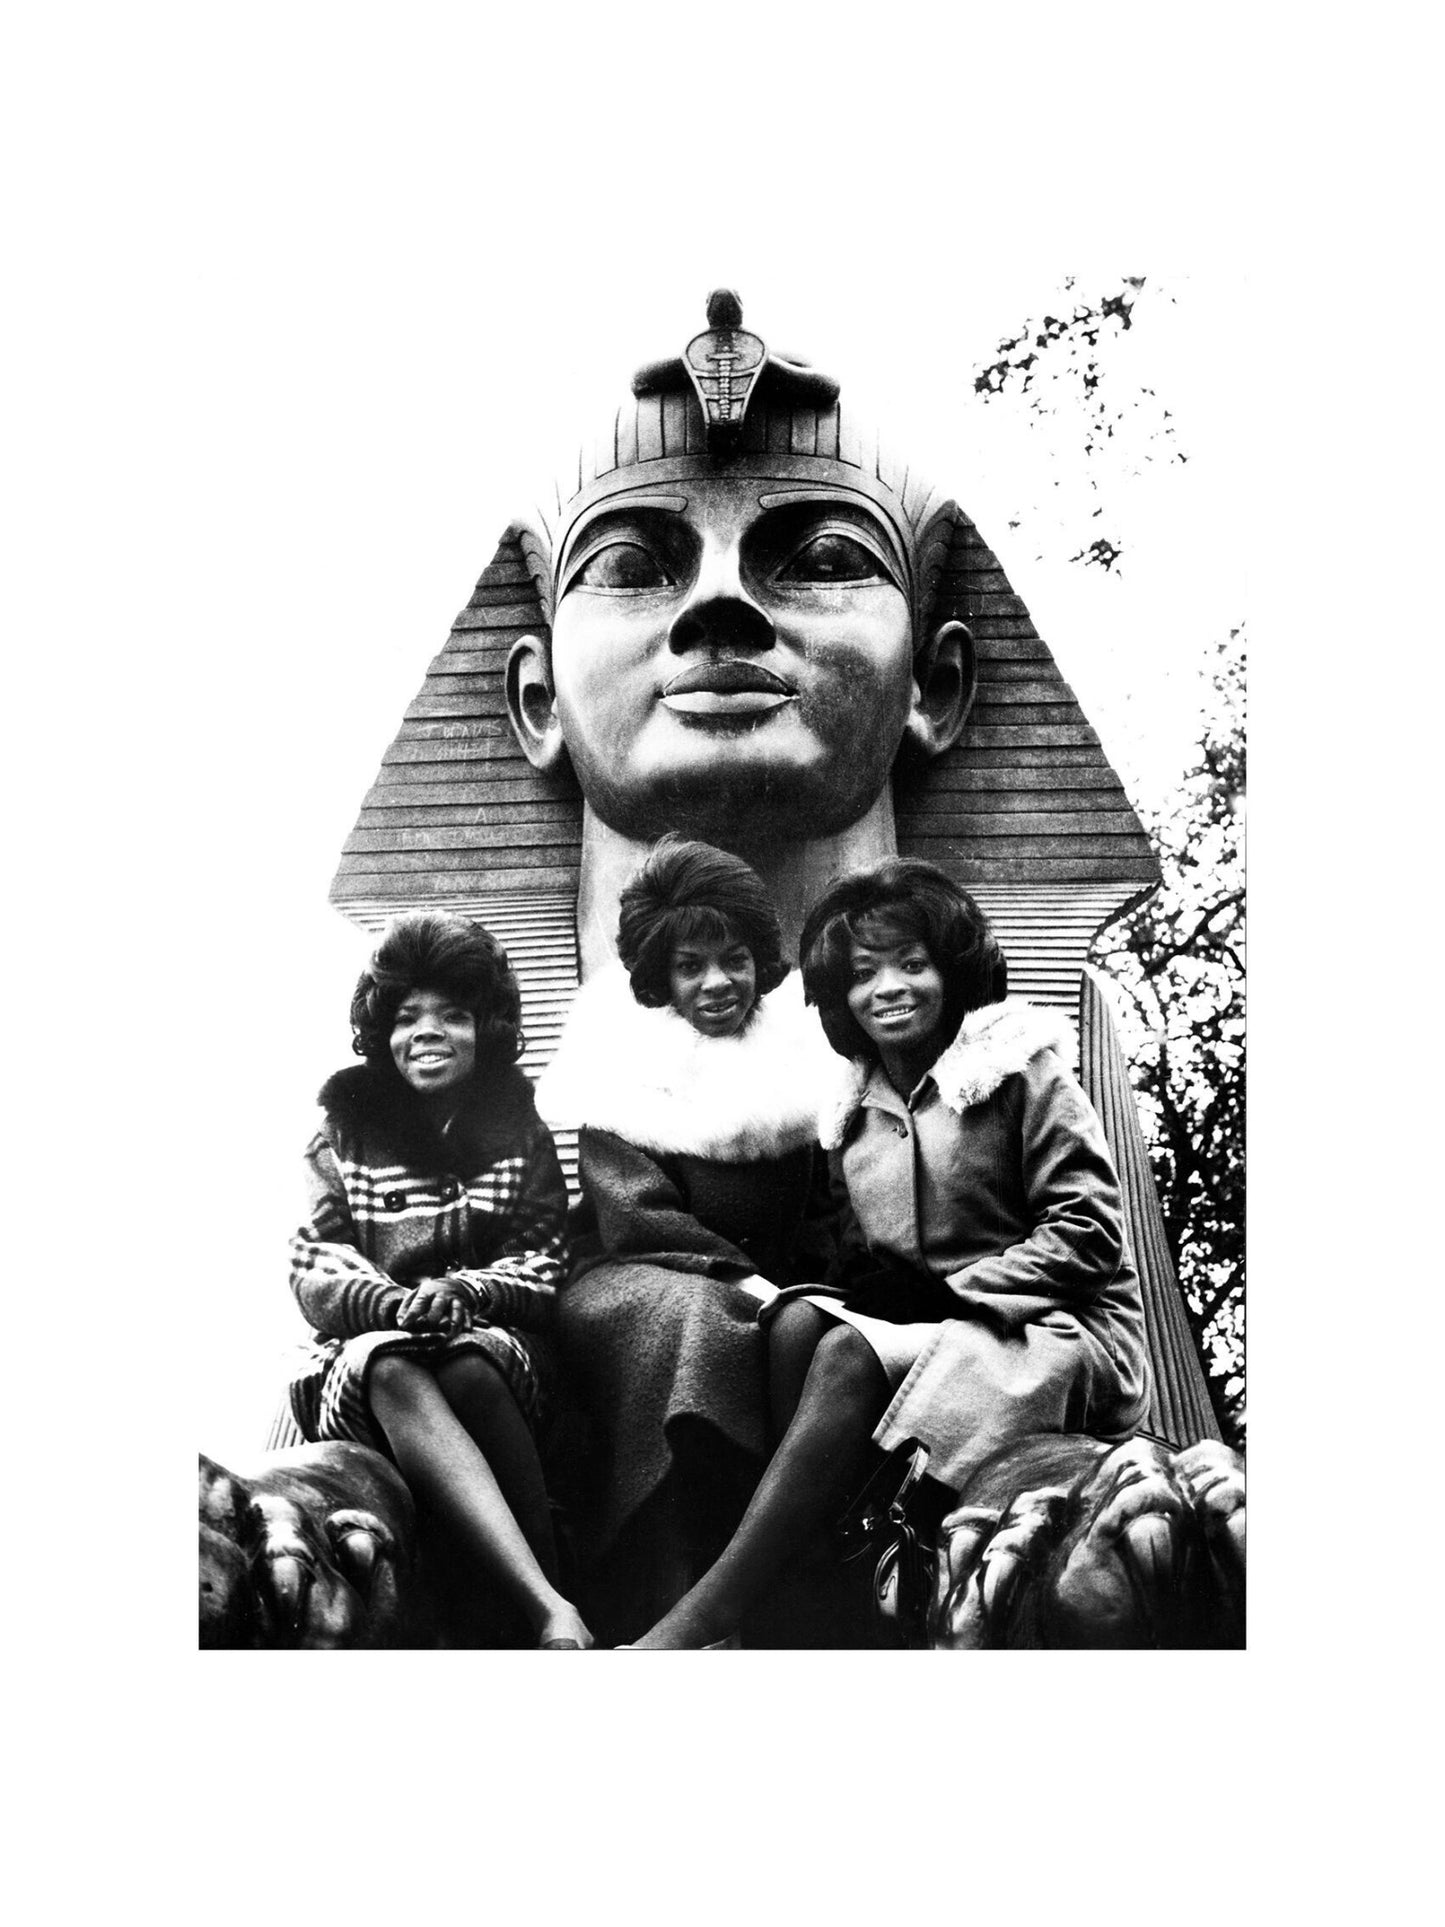 Martha and the Vandellas - Beside an Egyptian Statue, England, 1970s Print